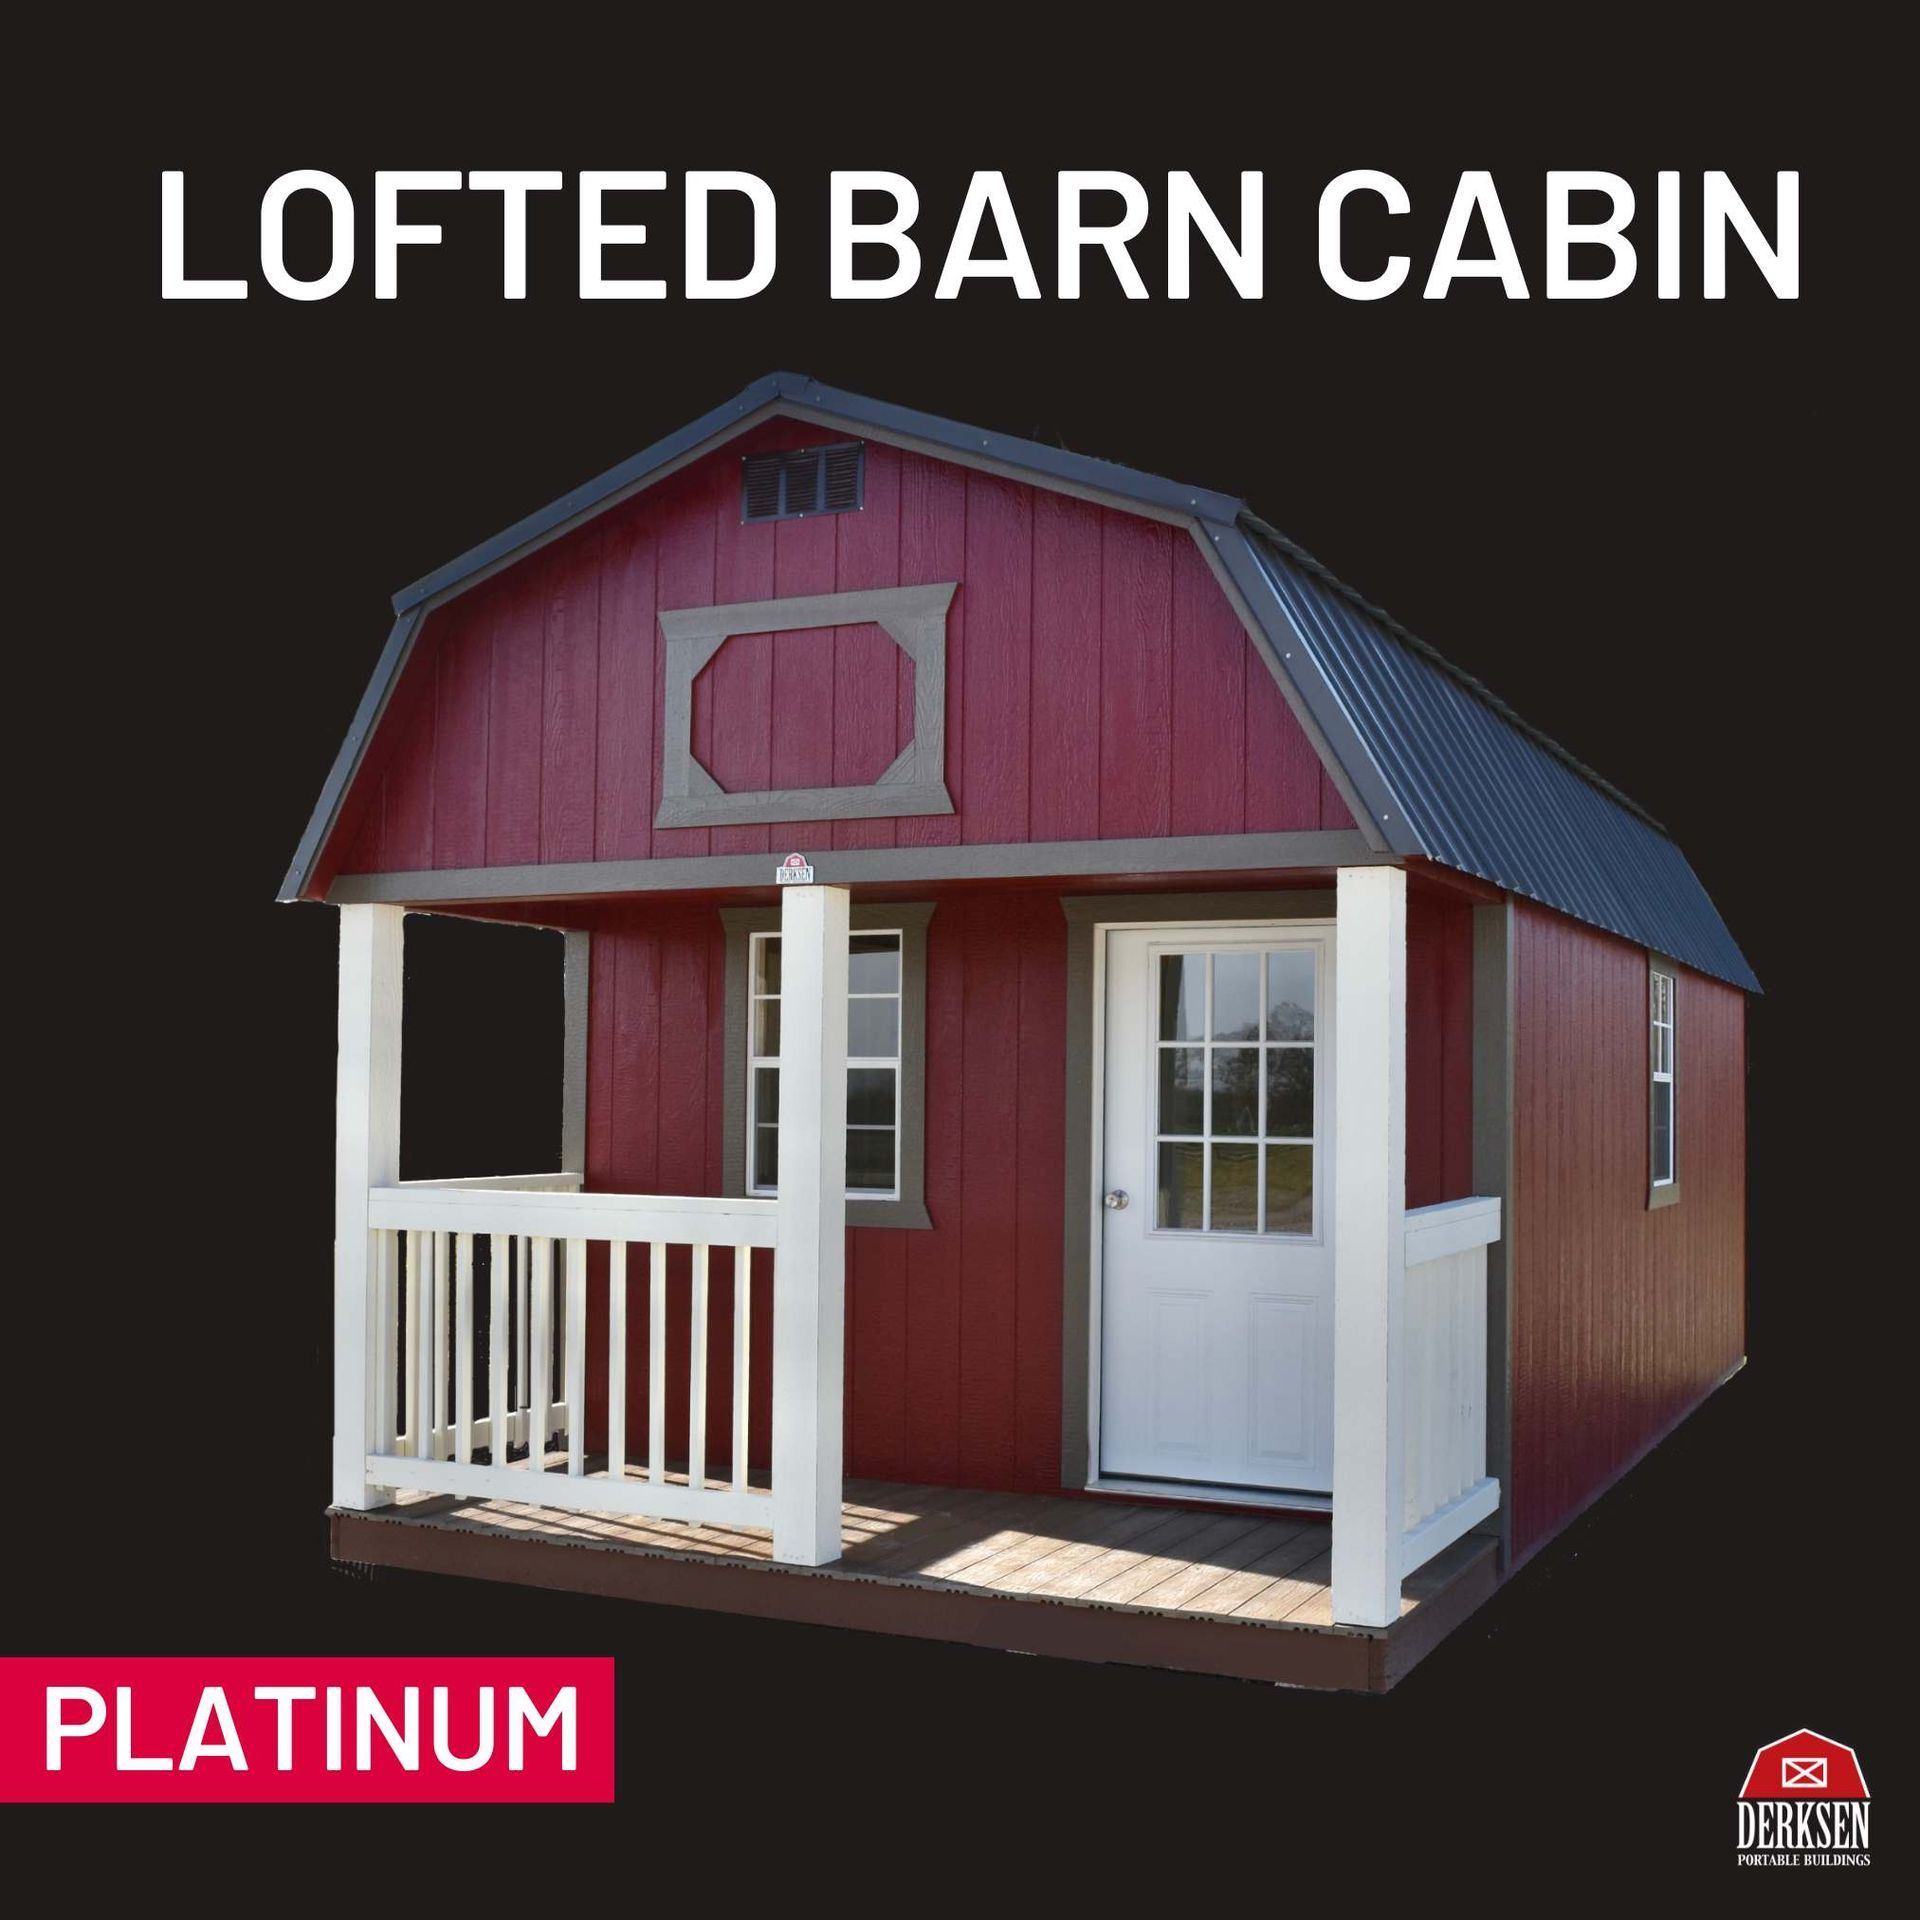 a picture of a lofted barn cabin platinum